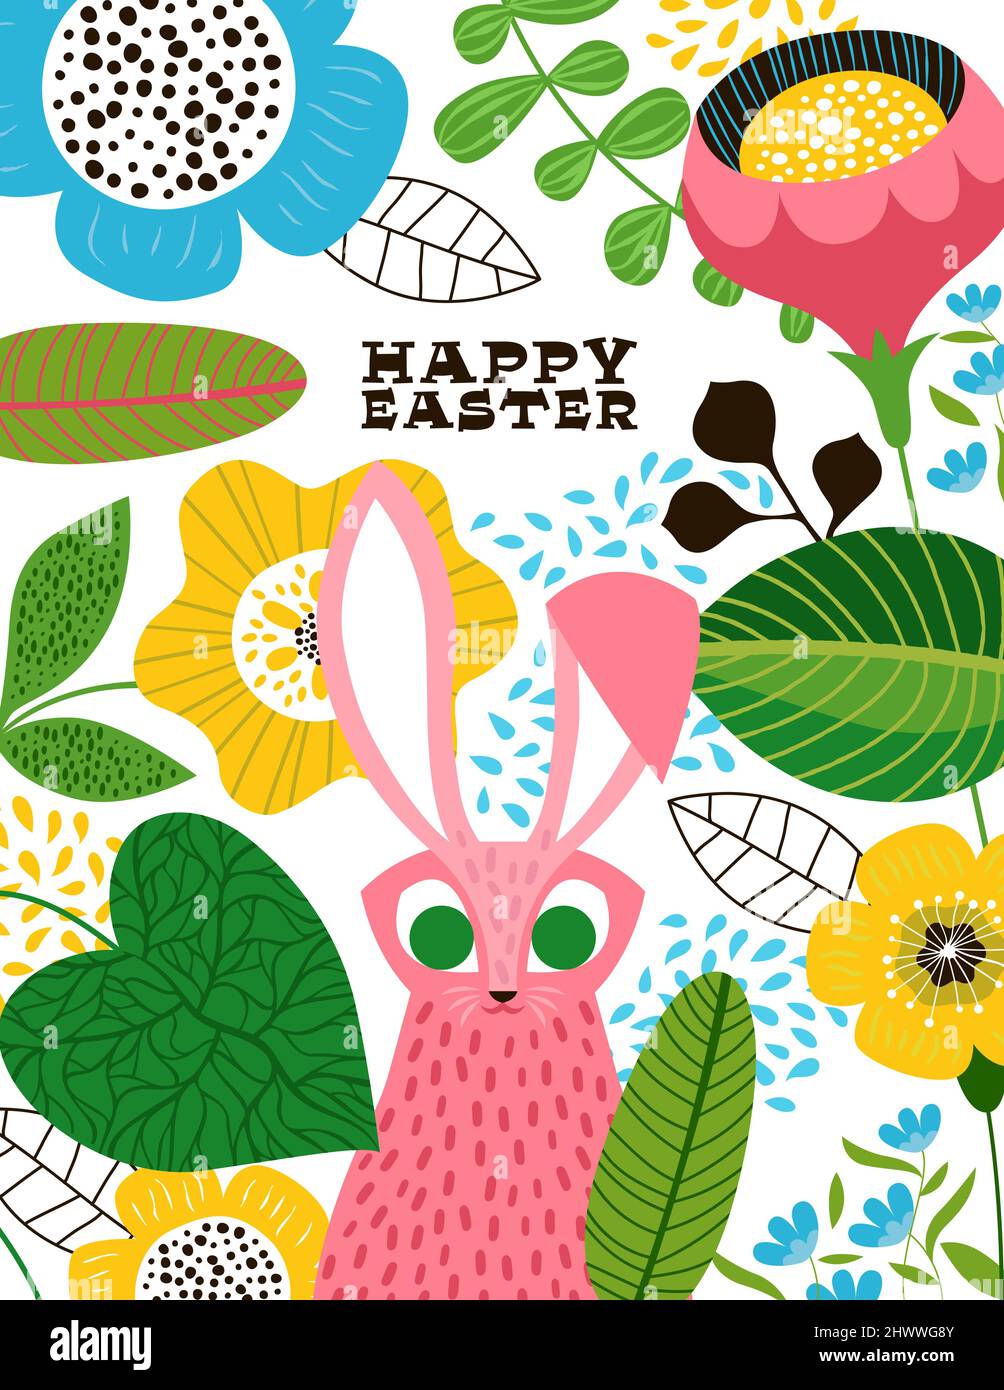 Happy Easter greeting card of funny rabbit animal in folk art style with nature decoration. Spring festival background illustration for traditional ch Stock Vector